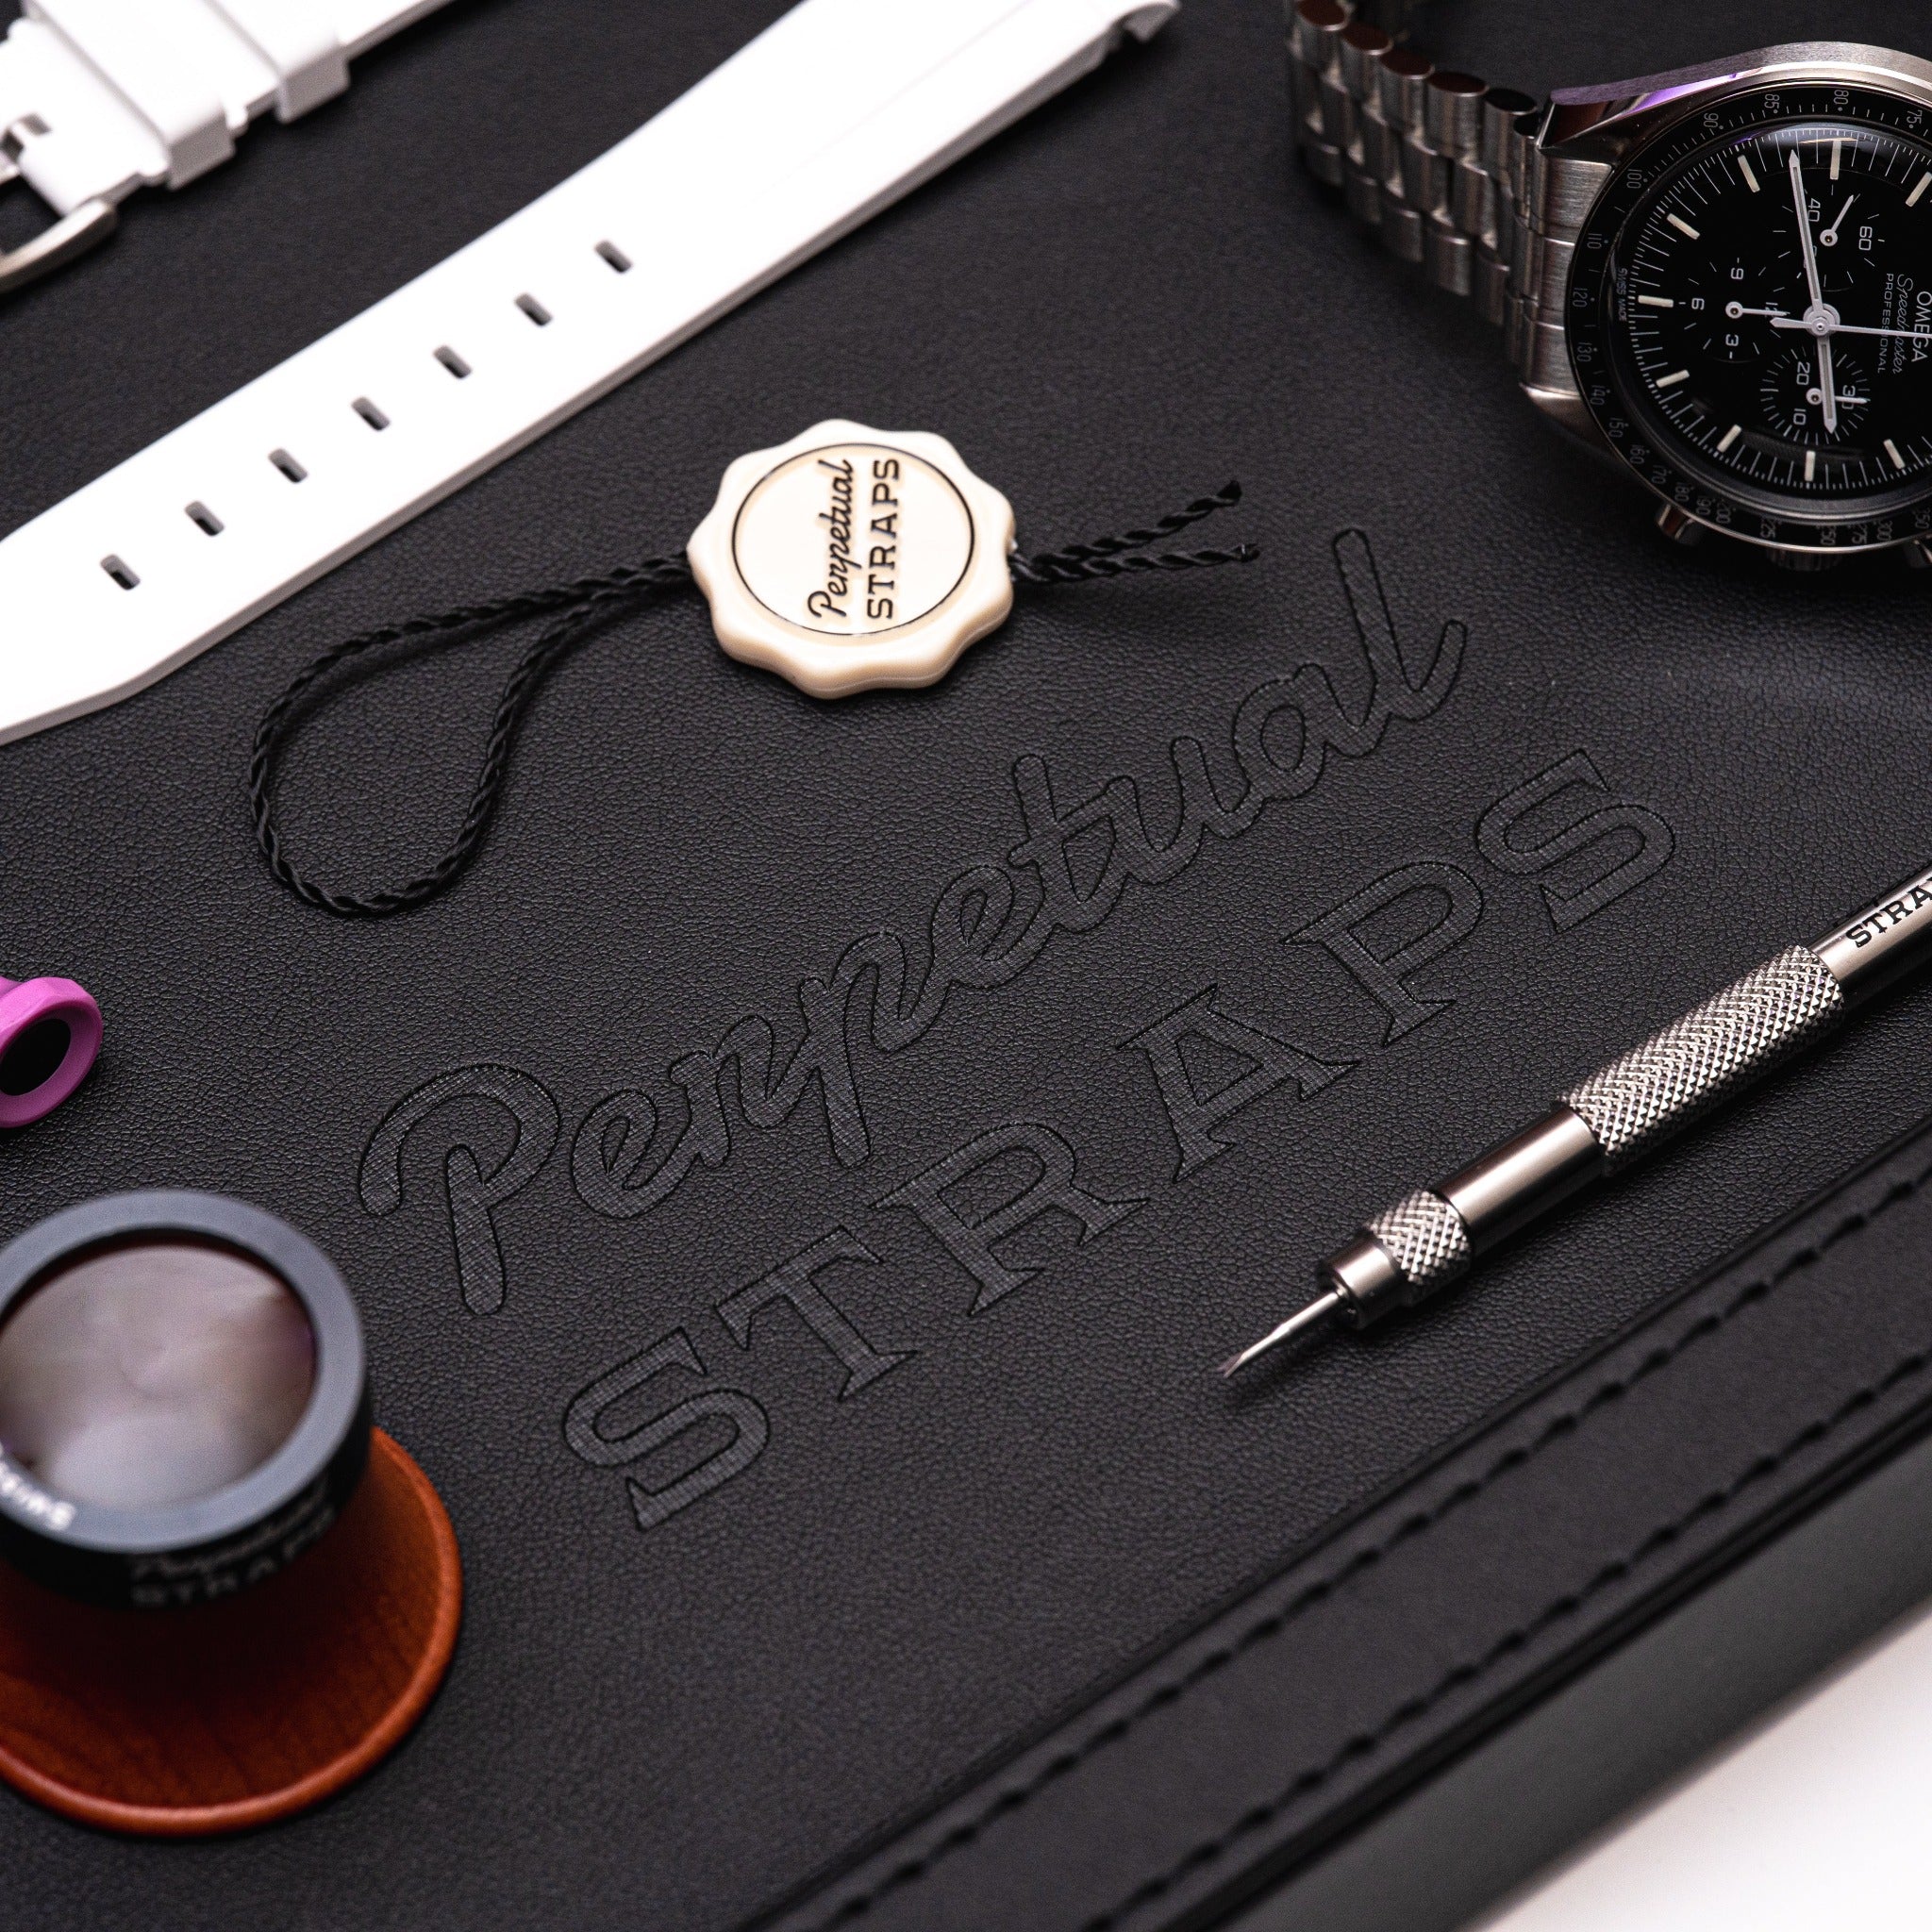 Convertible Watch Case + Valet | Personal Creations